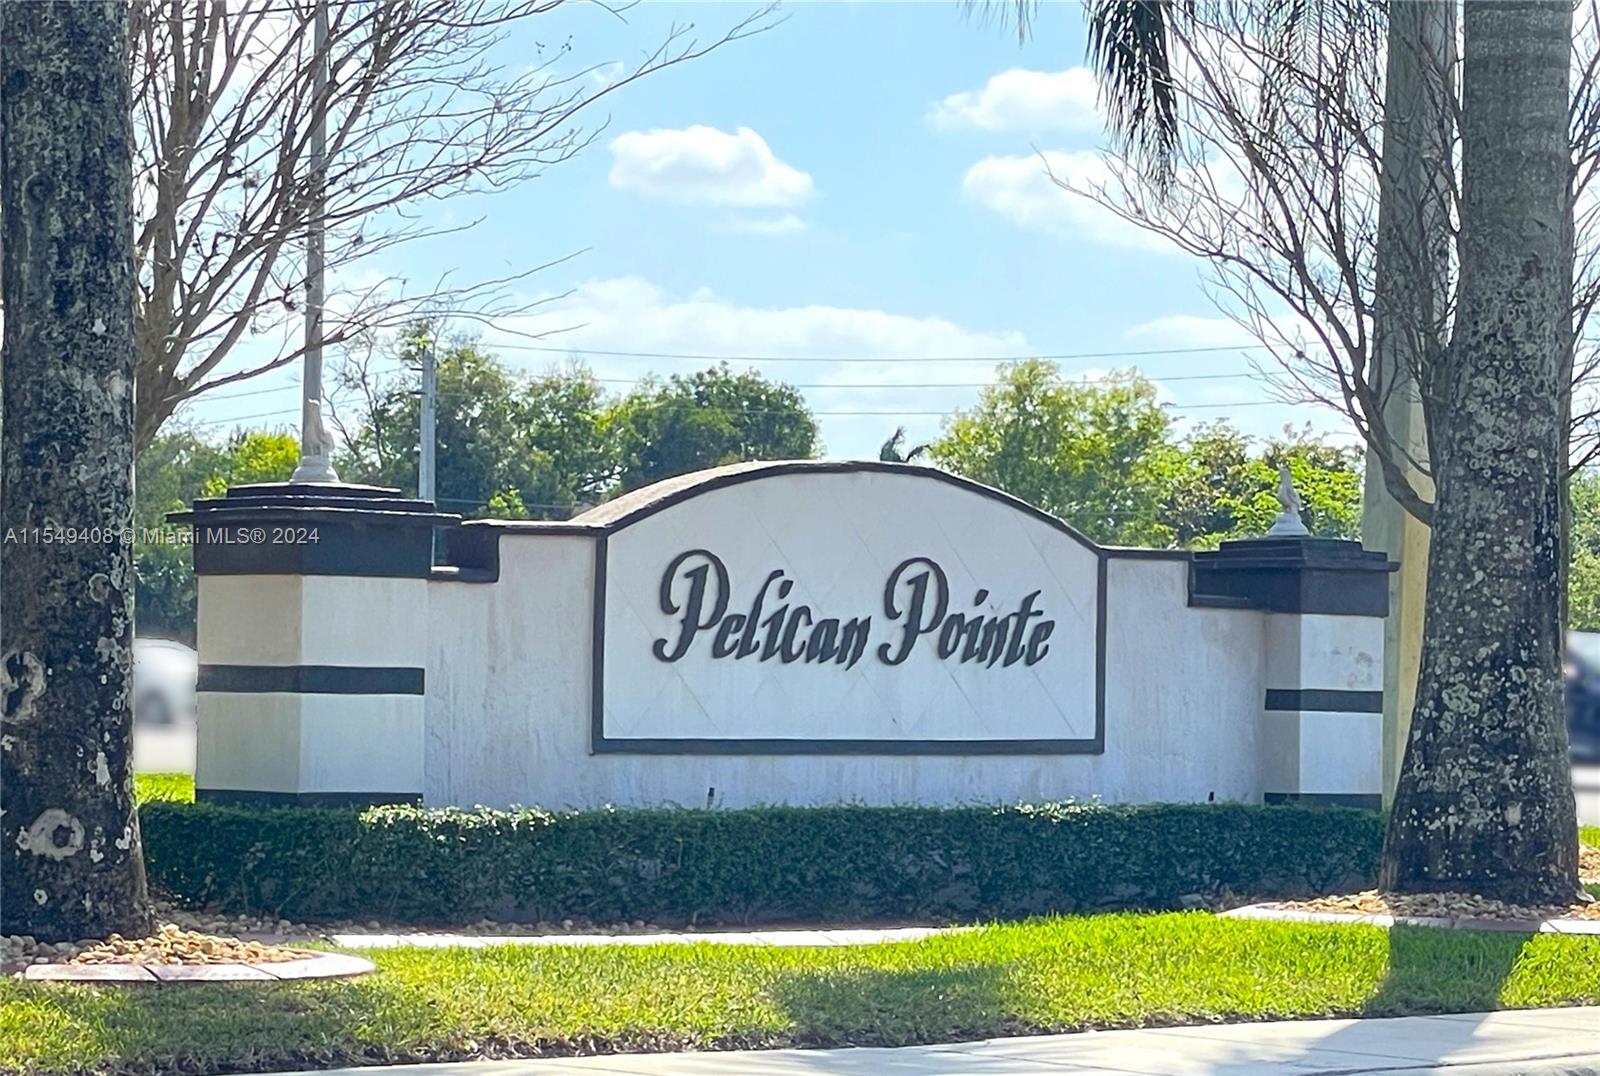 406 SW 120th Ave 406, Pembroke Pines, Florida 33025, 2 Bedrooms Bedrooms, ,2 BathroomsBathrooms,Residentiallease,For Rent,406 SW 120th Ave 406,A11549408